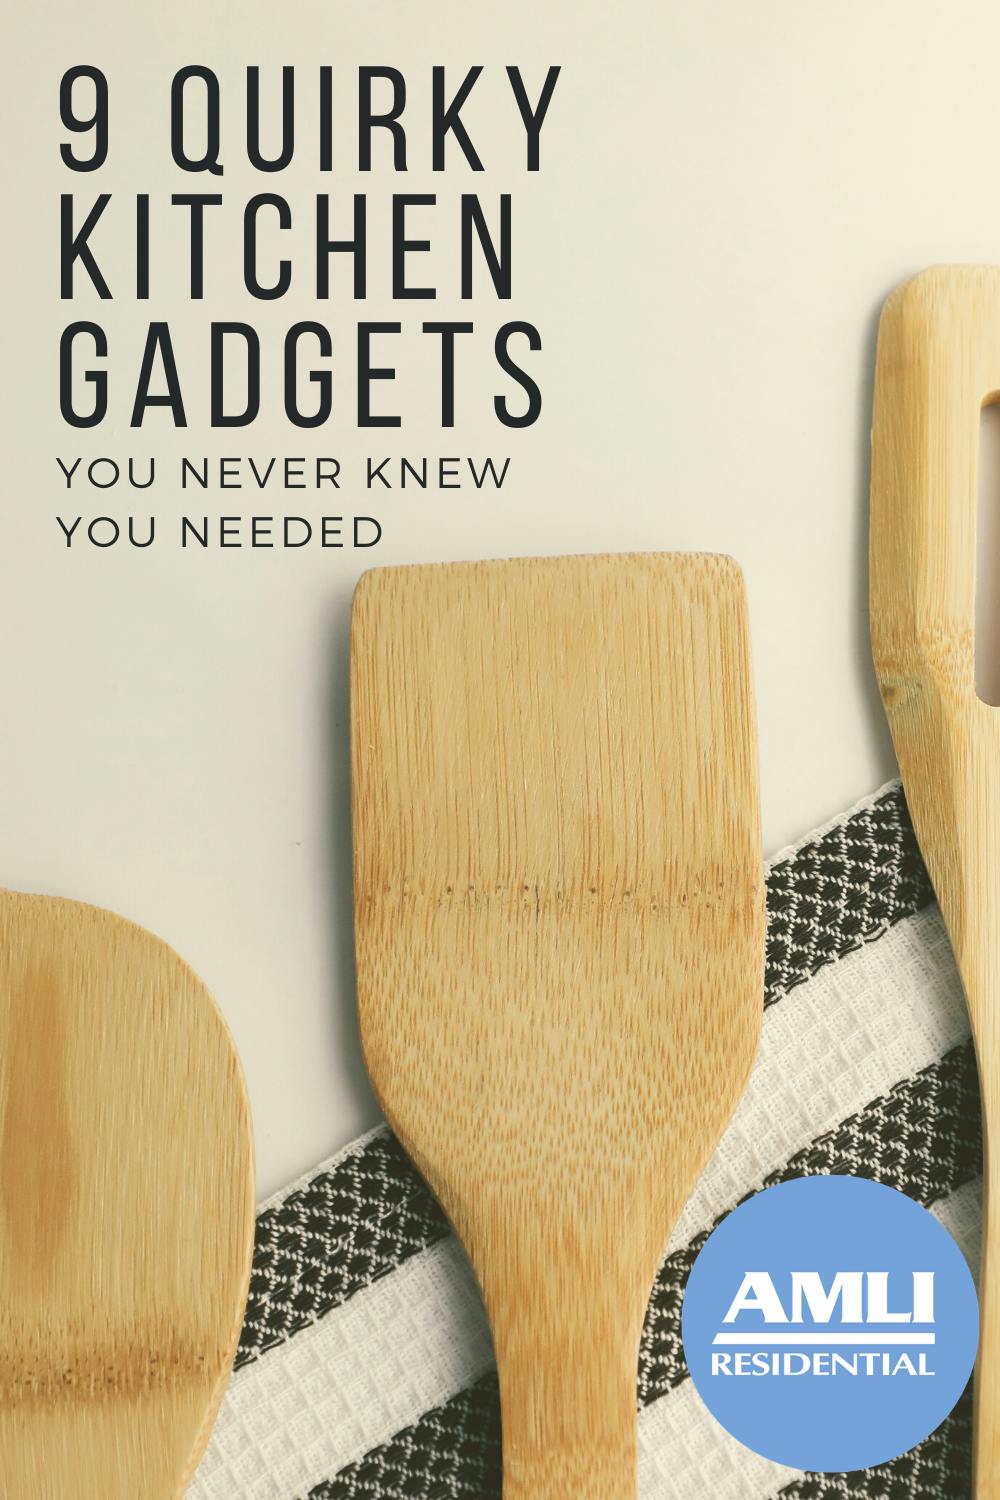 Kitchen stuff you never knew you needed - Gallery